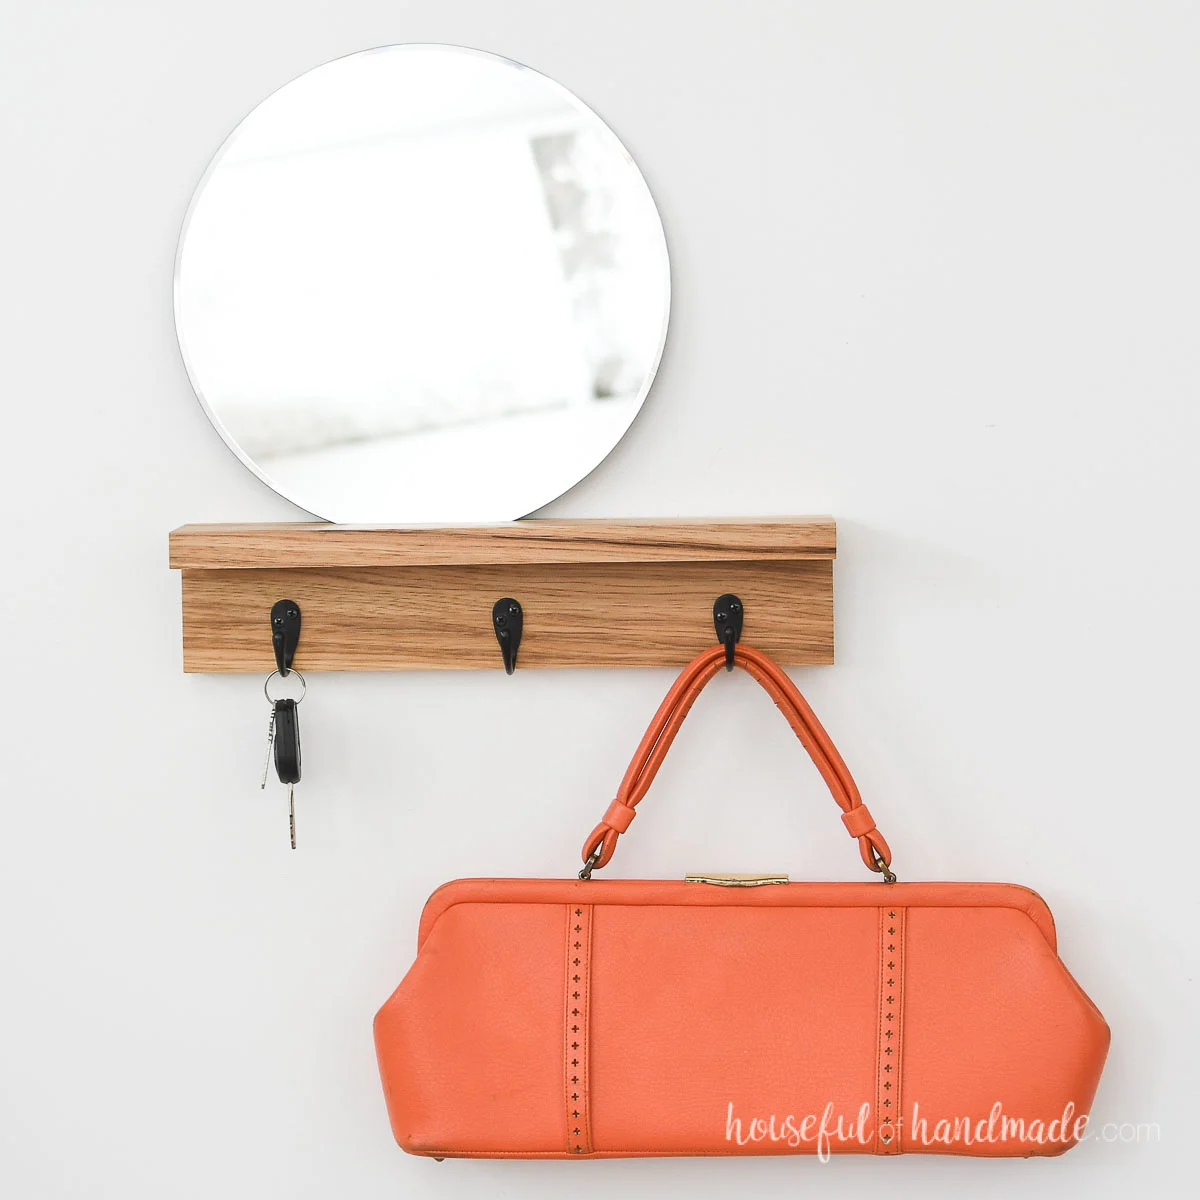 Wood entryway shelf with a mirror on top and hooks for keys and bags below.